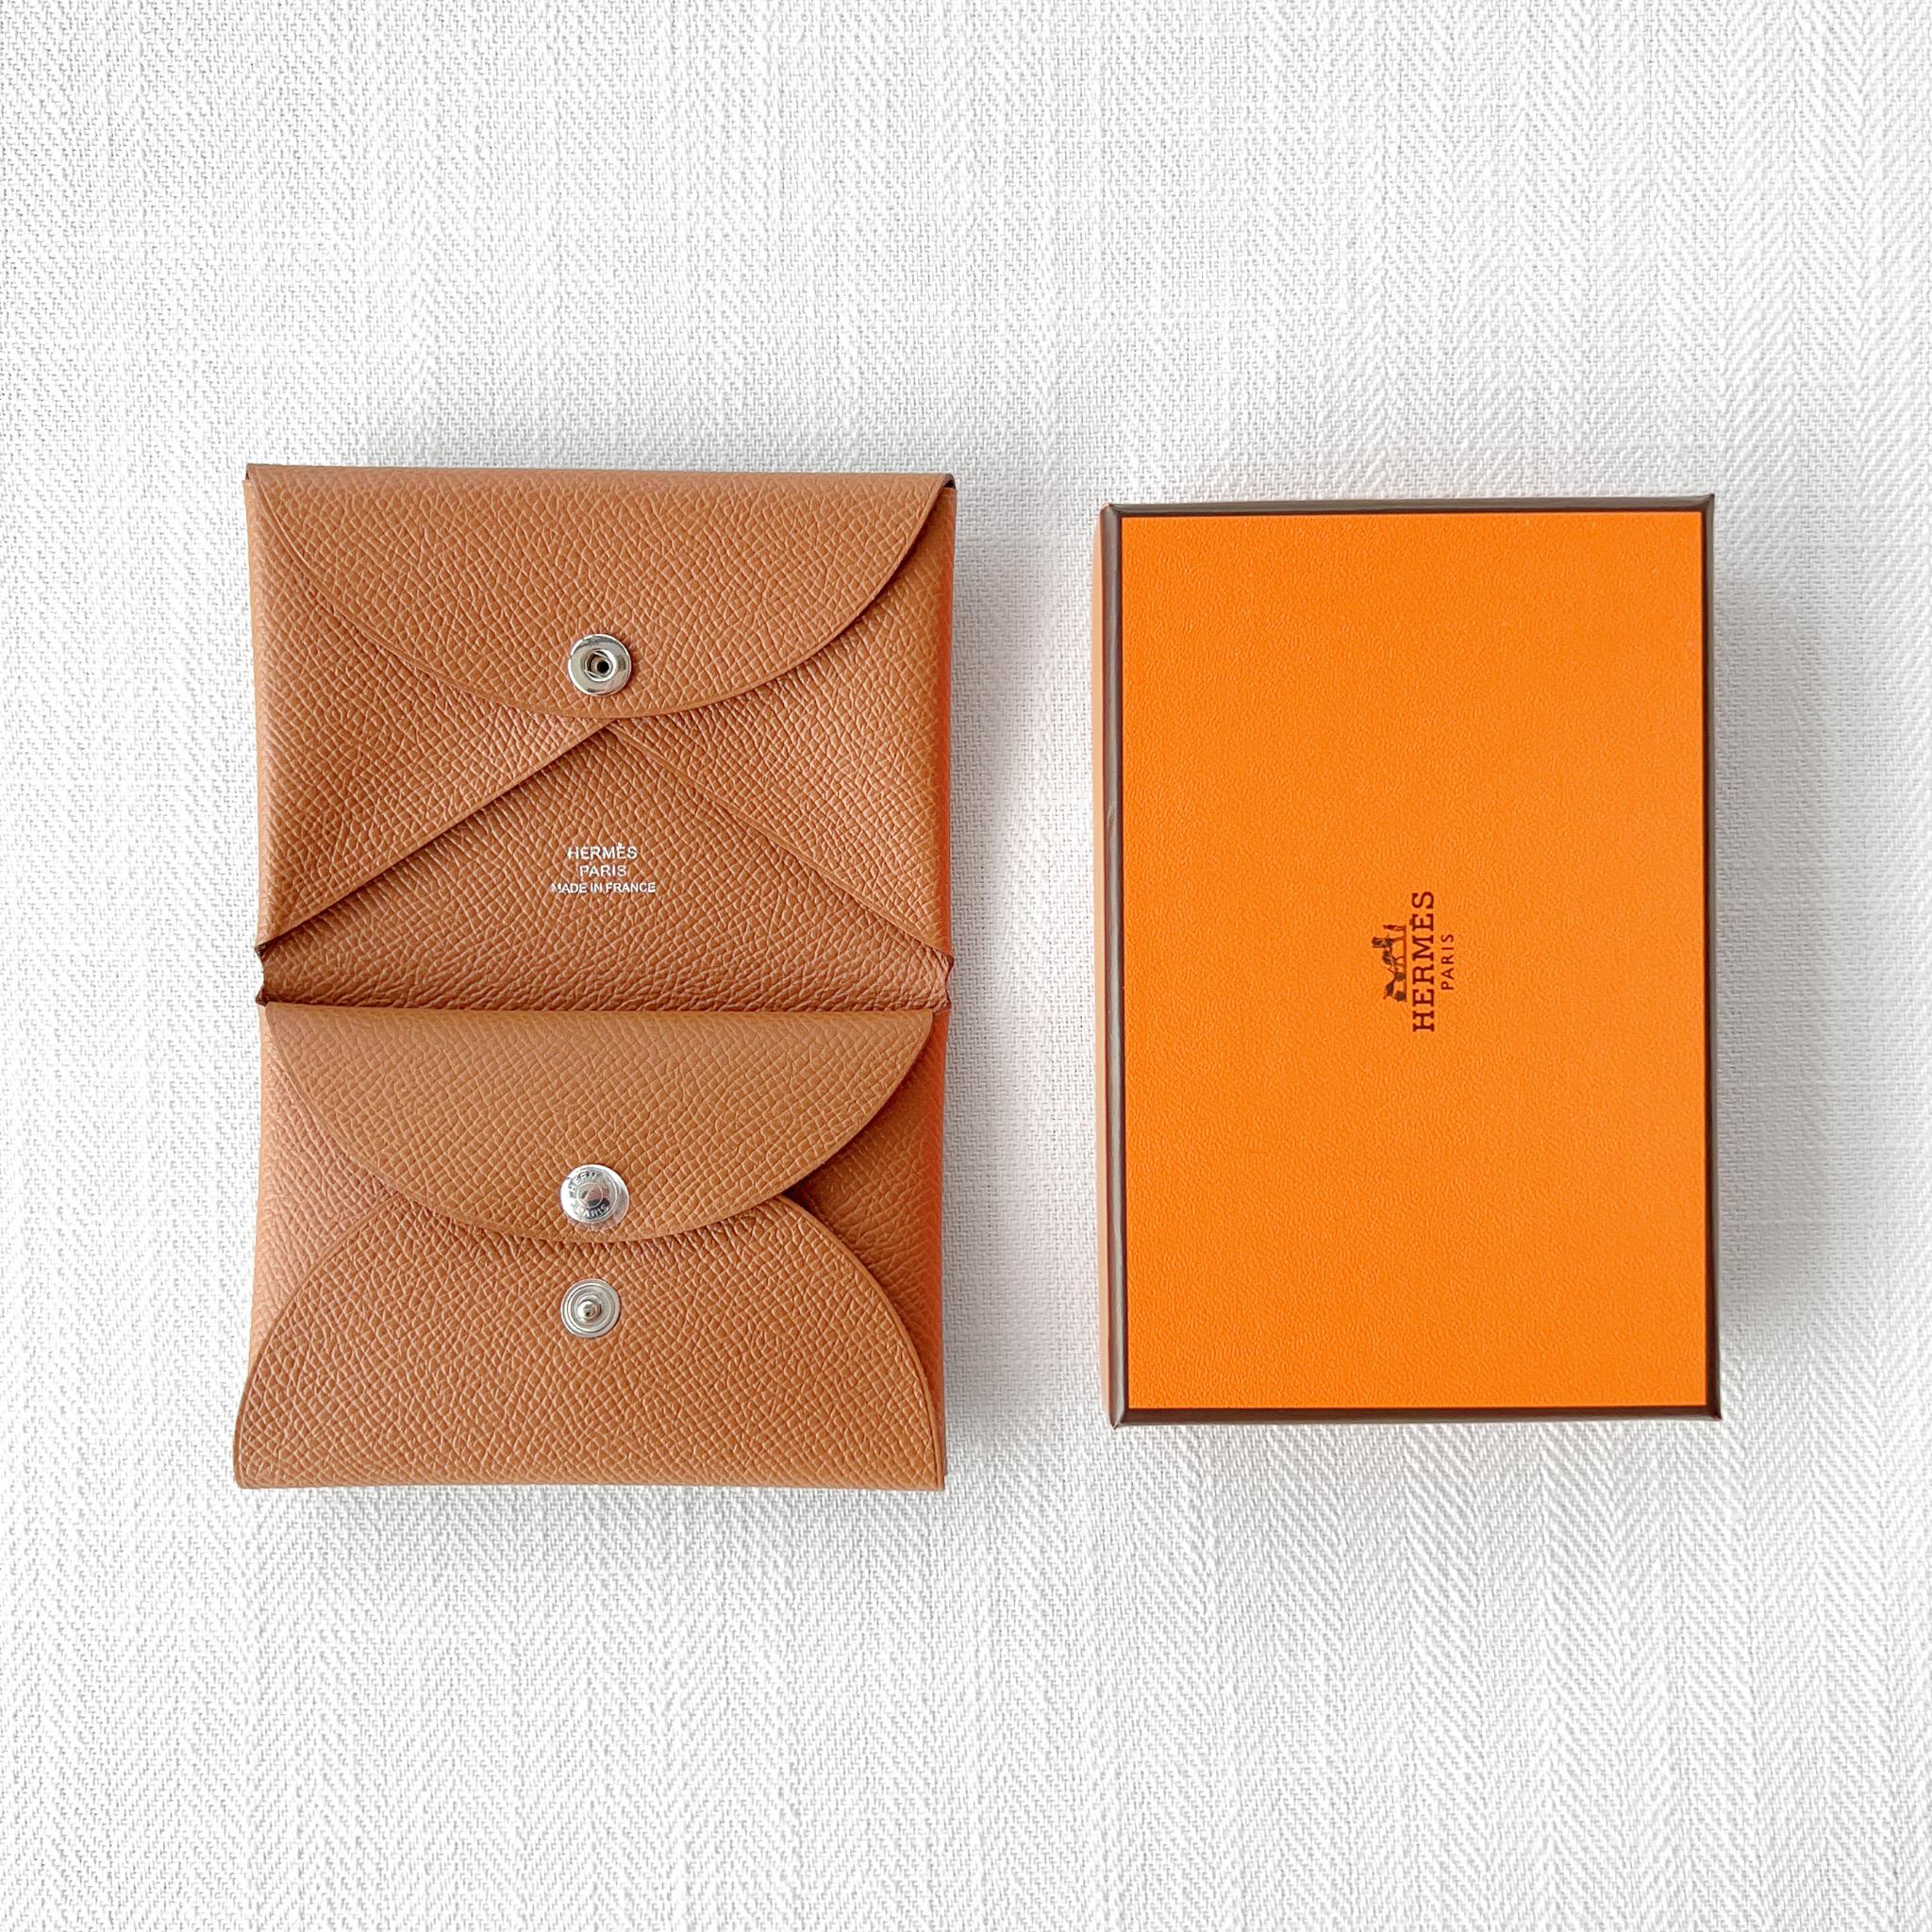 This Hermès Calvi Duo Card Holder in Gold, Brown is made from luxurious Epsom leather, it features a snap closure and 2 credit card slots. The Calvi duo is the redesigned version of the classic Calvi card holder. 

Brand: Hermes

Colour: Gold